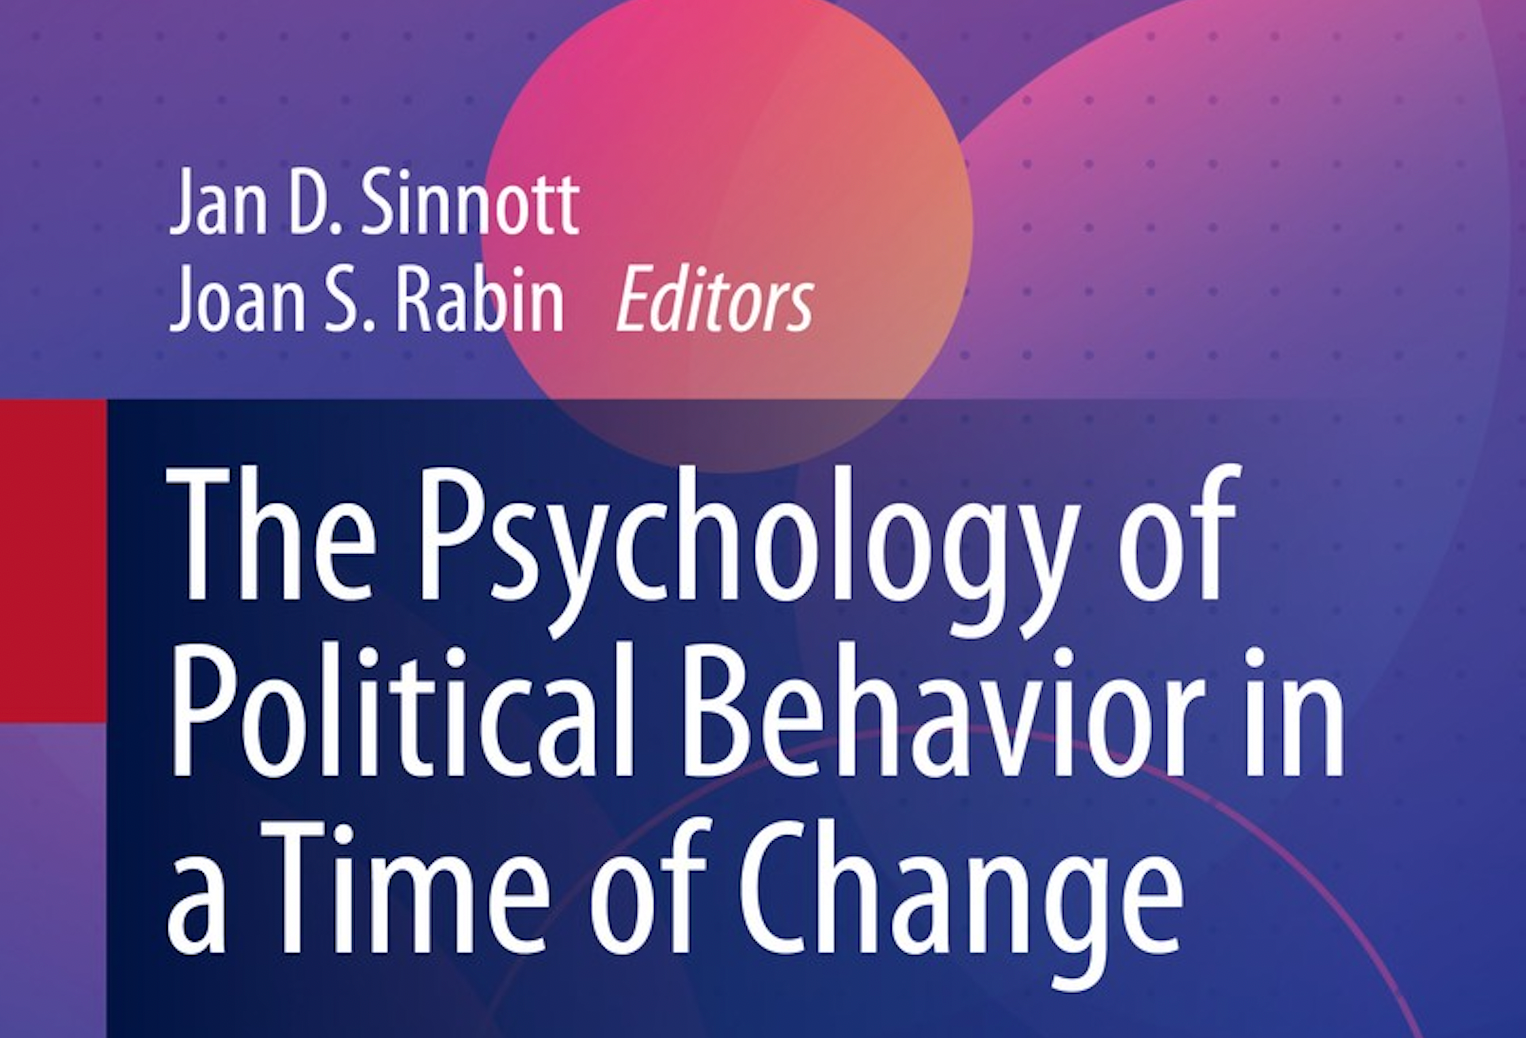 Postformal Psychology: The new “Normal” in Times of Exponential Change (Springer, 2021)